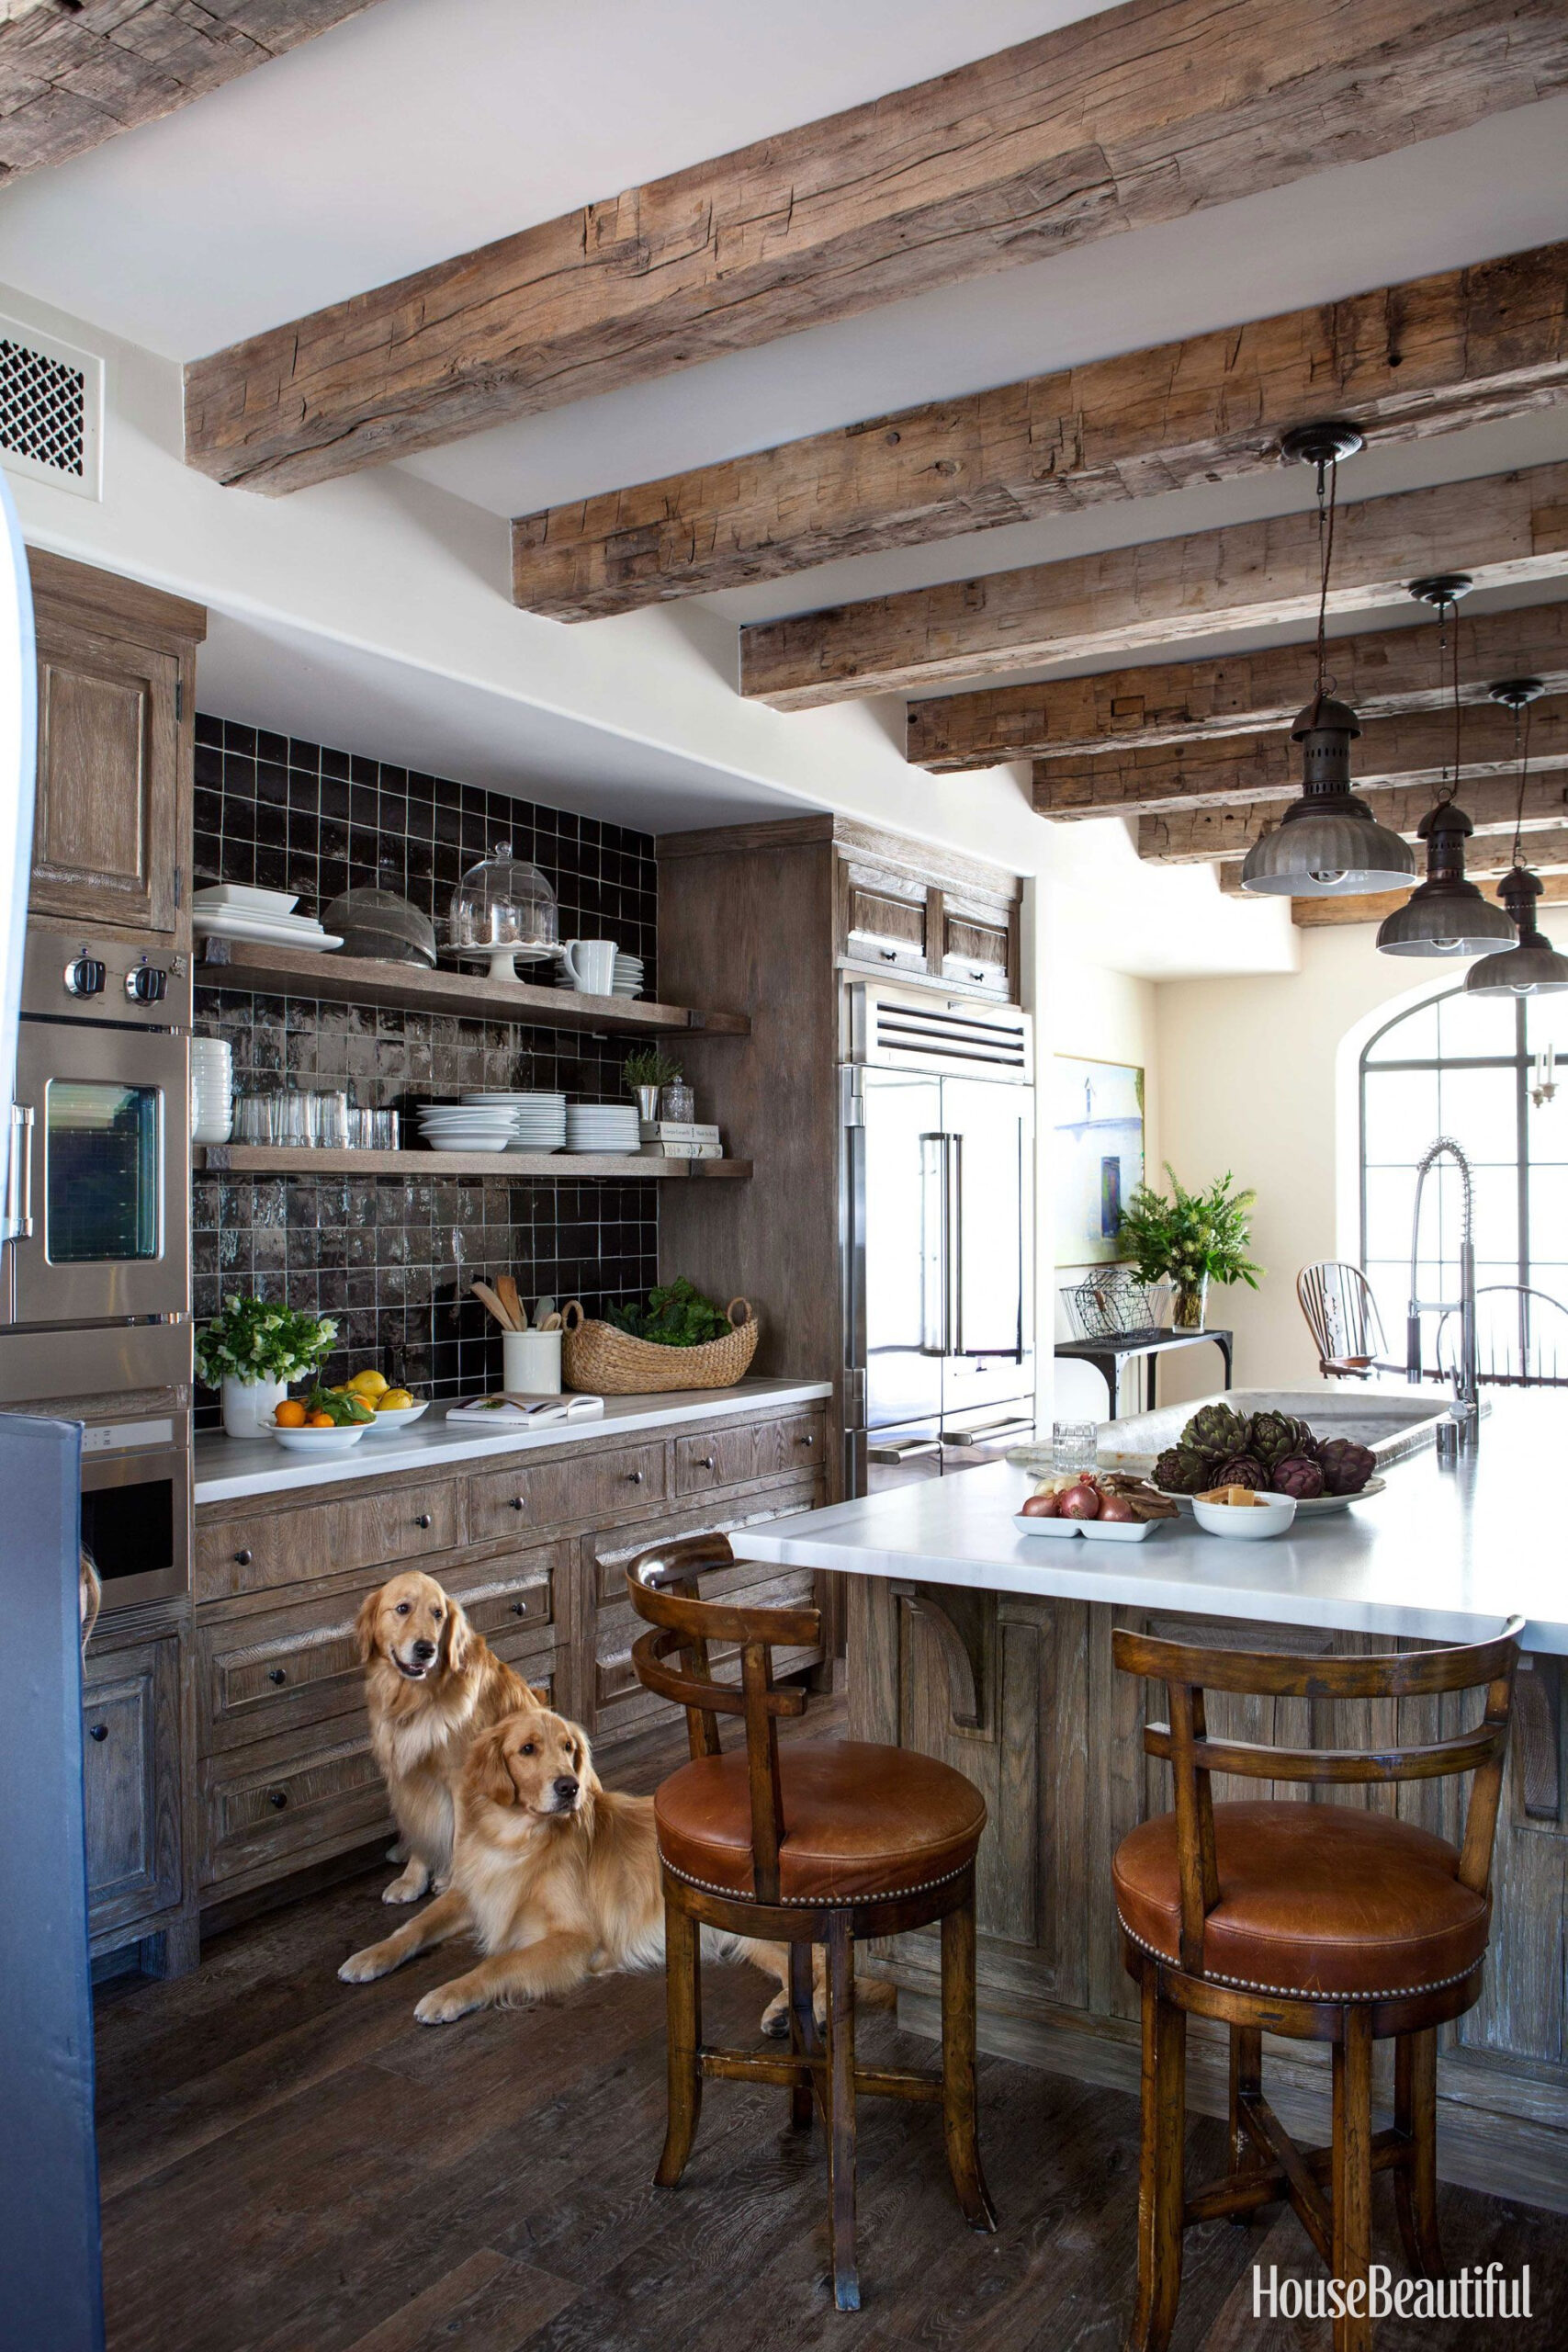 Best Rustic Kitchens - Modern Country Rustic Kitchen Decor Ideas